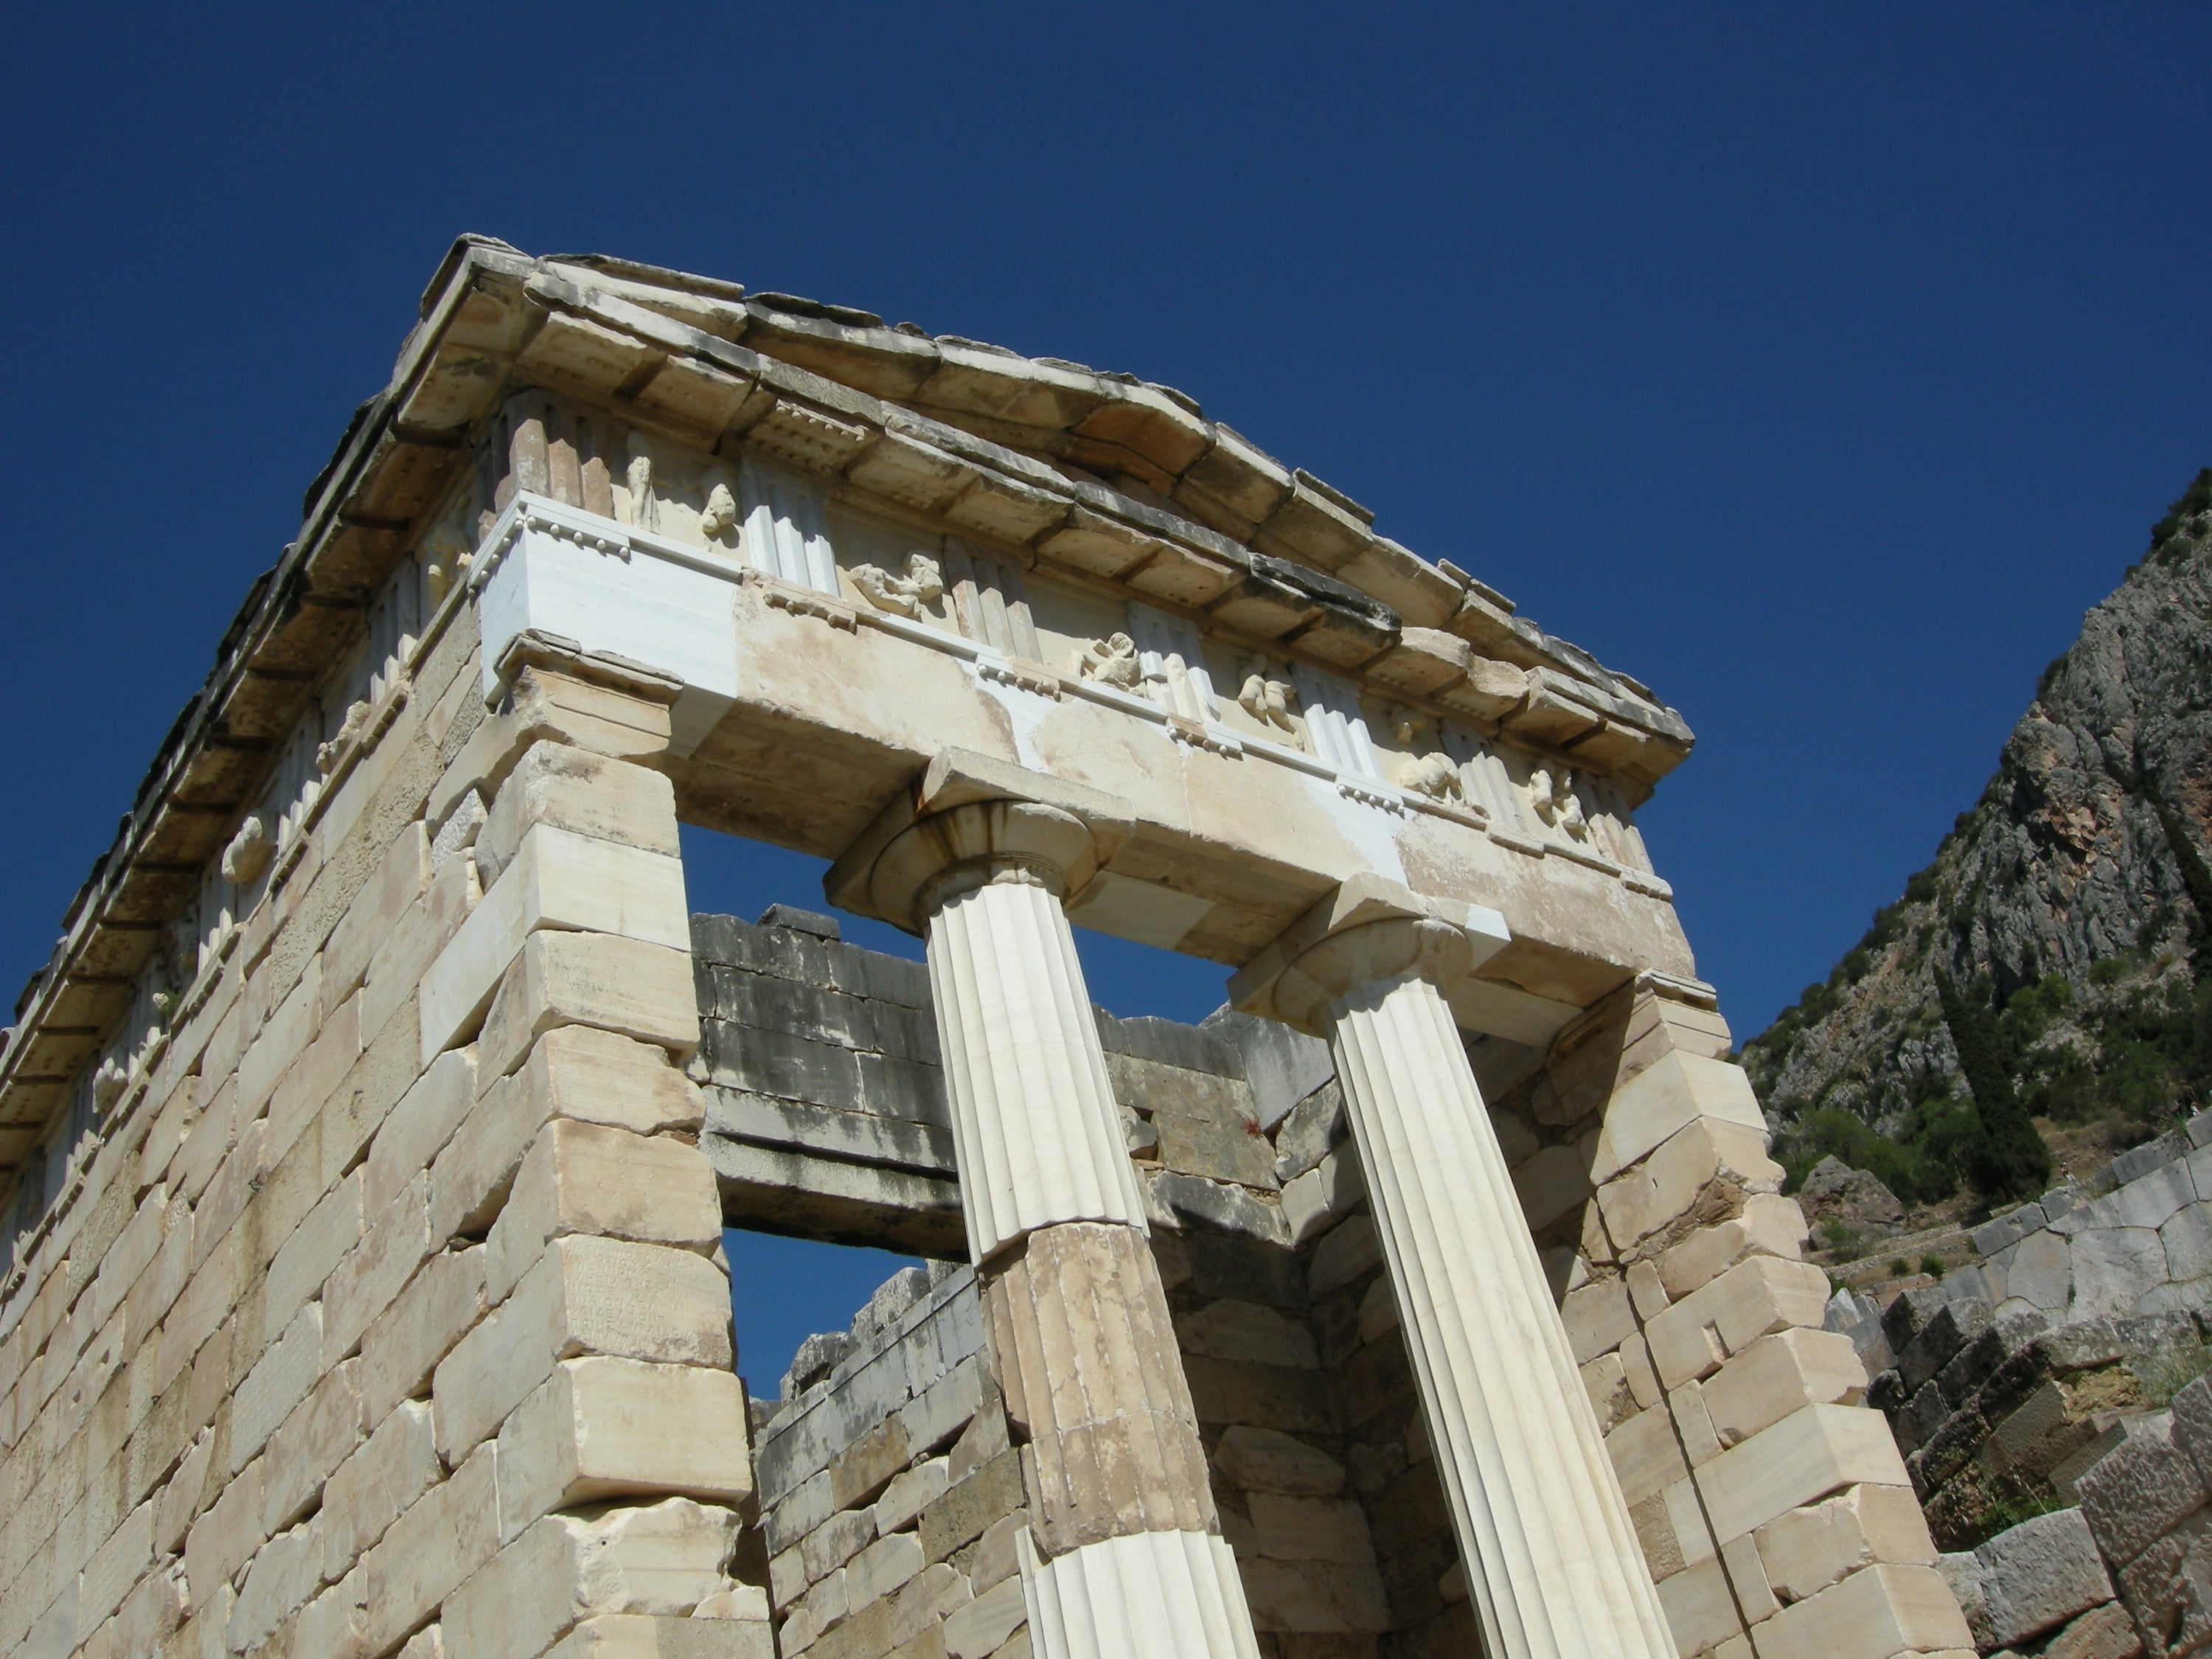 A close of up of the ruins of a Classical era temple showing the front of the building tall columns holding up a sculpted cornice